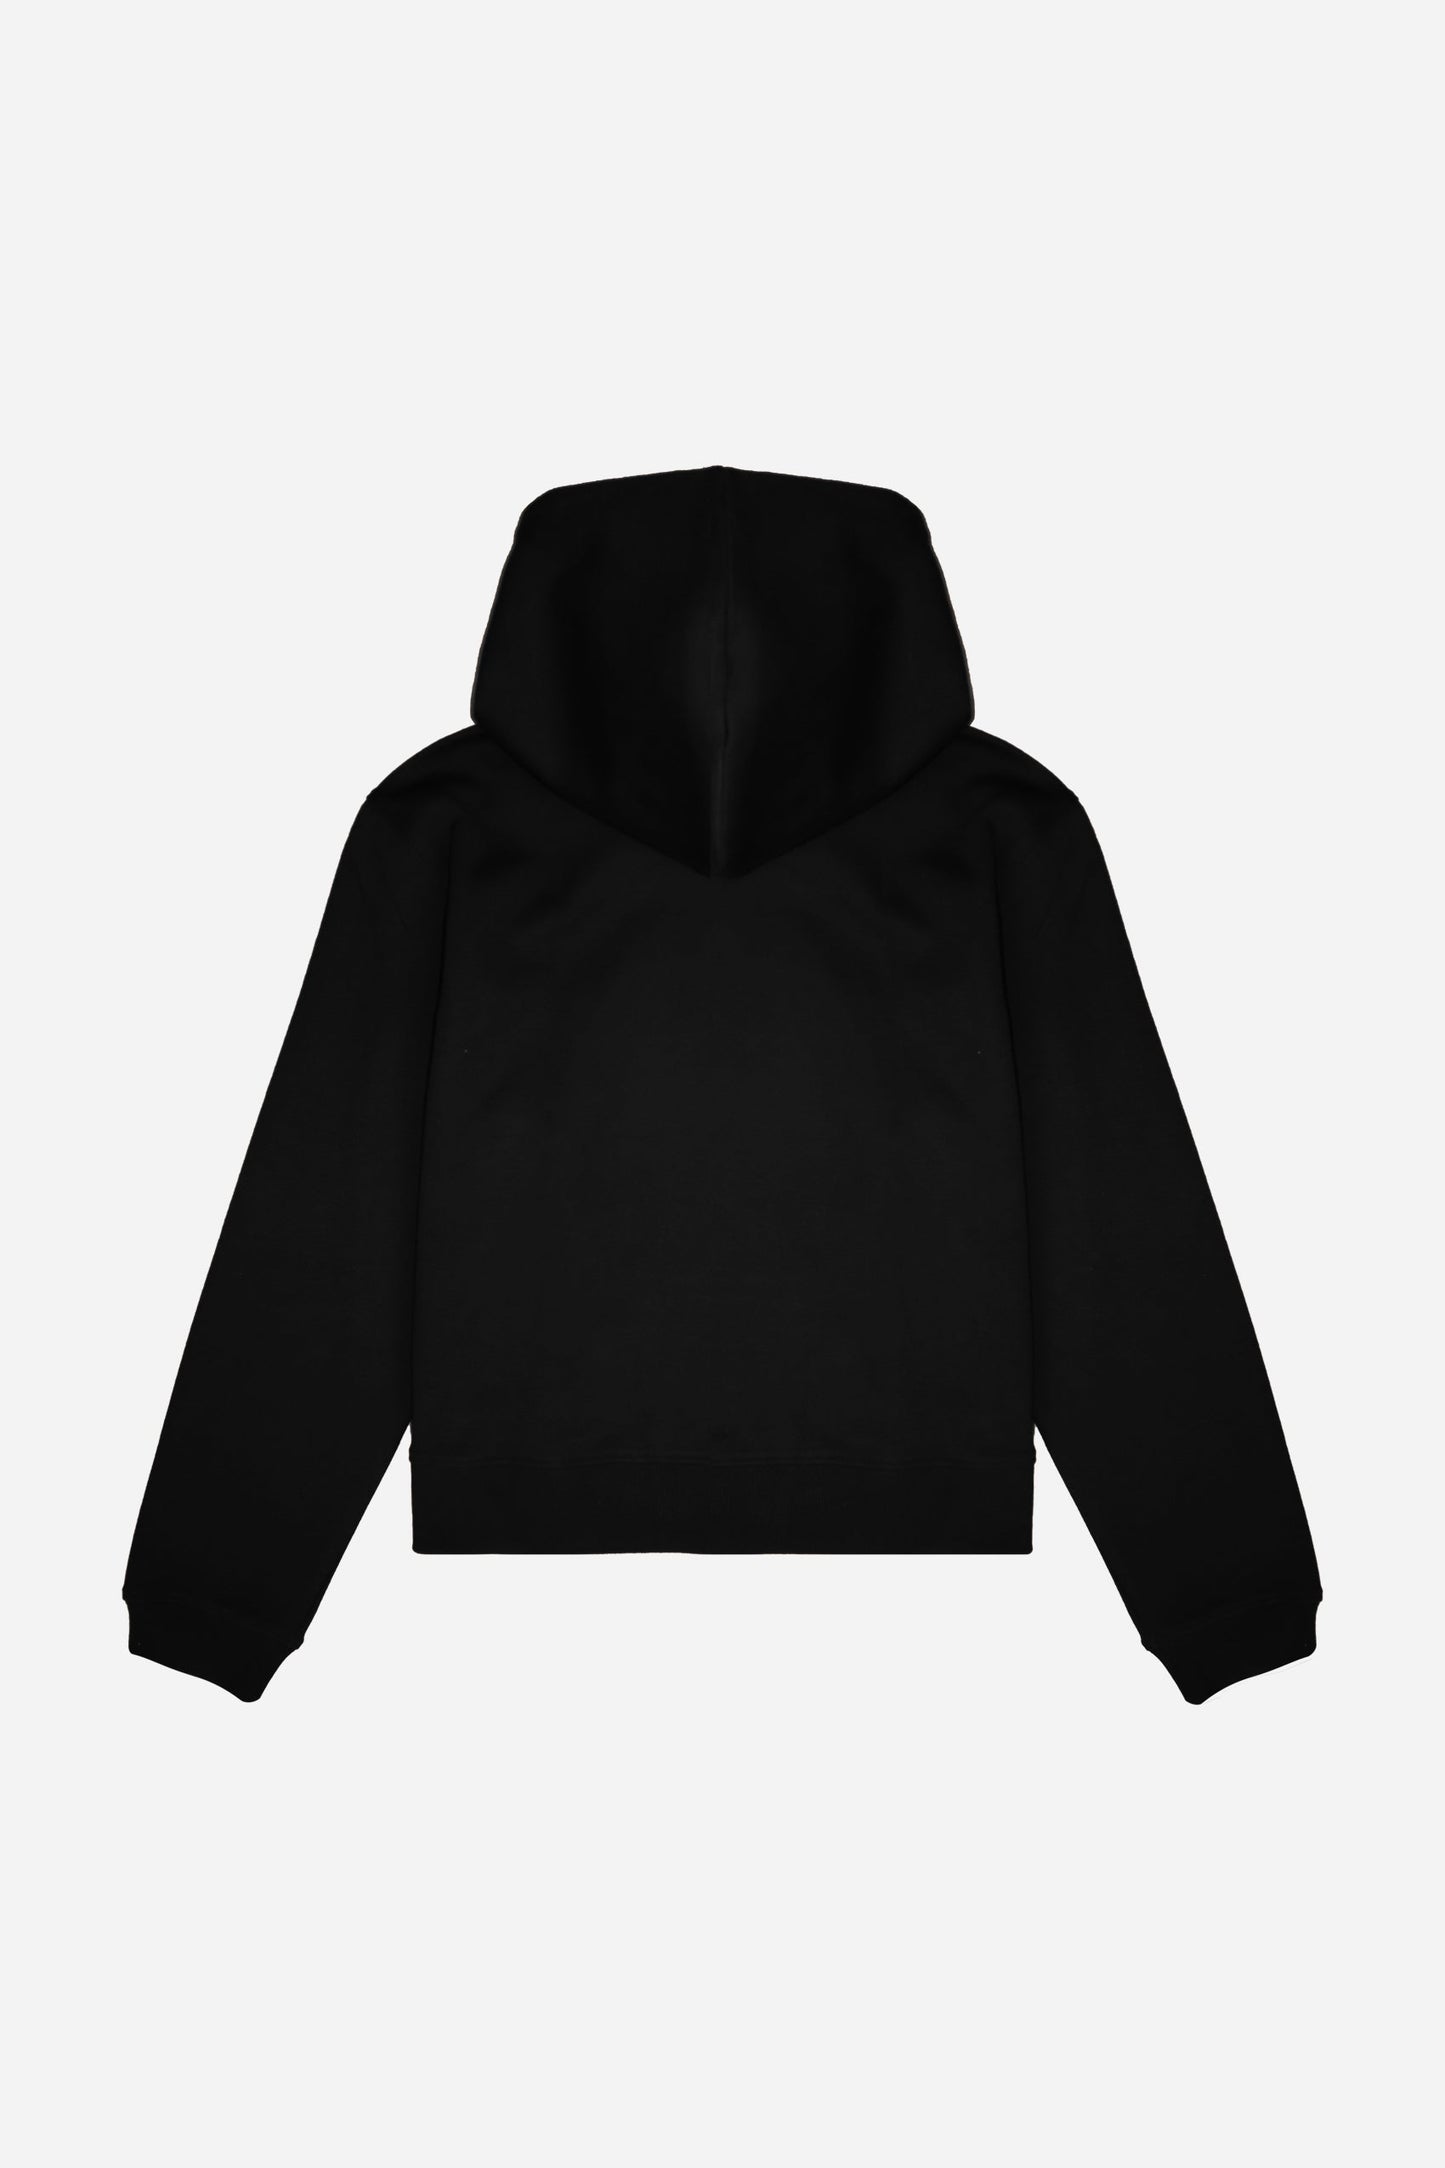 Yuki Boss Embroidery Hoodie - Limited to 300